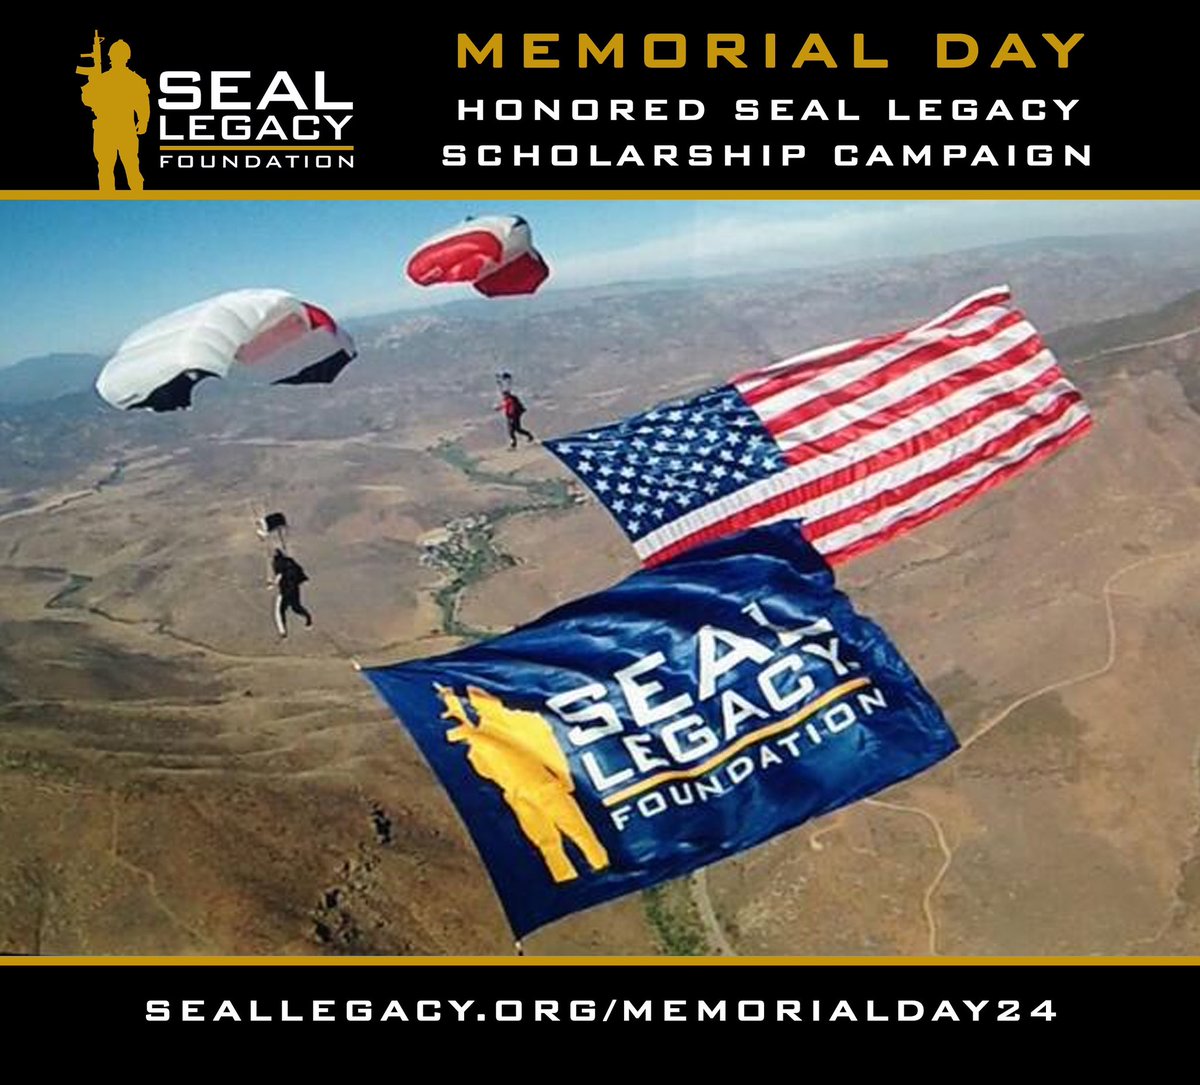 The SEAL Legacy Memorial Day Scholarship Campaign and Auction will close in FIVE HOURS! Help us ensure that the LEGACY of our Fallen will live on FOREVER! DONATE: SEALLegacy.org/memorialday24 AUCTION: SEALLegacy.org/auction24